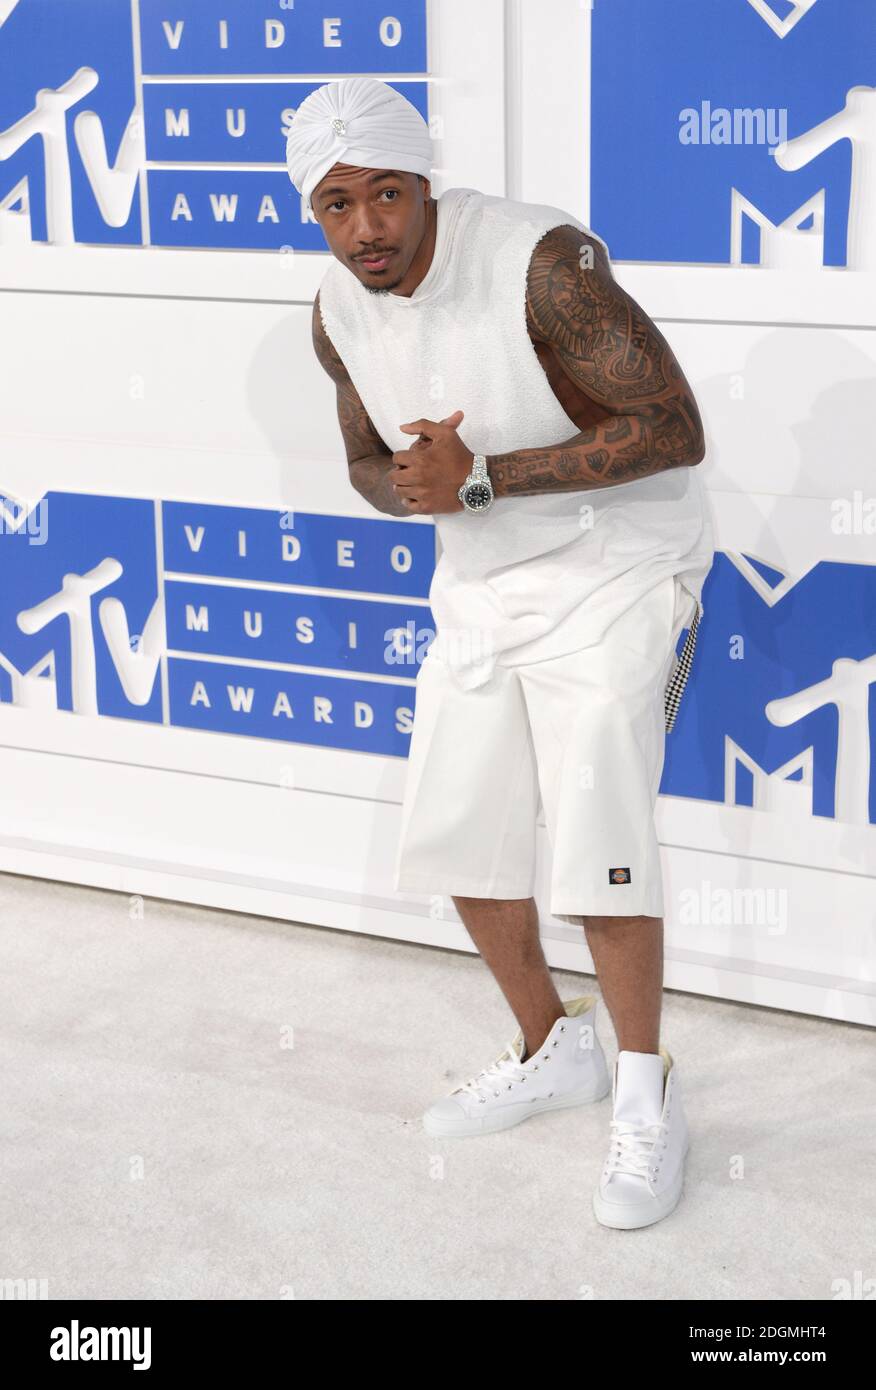 Nick Cannon arrives to the MTV Music Video Awards in Miami. August 28,  2005.CannonNick345 Red Carpet Event, Vertical, USA, Film Industry,  Celebrities, Photography, Bestof, Arts Culture and Entertainment, Topix  Celebrities fashion /